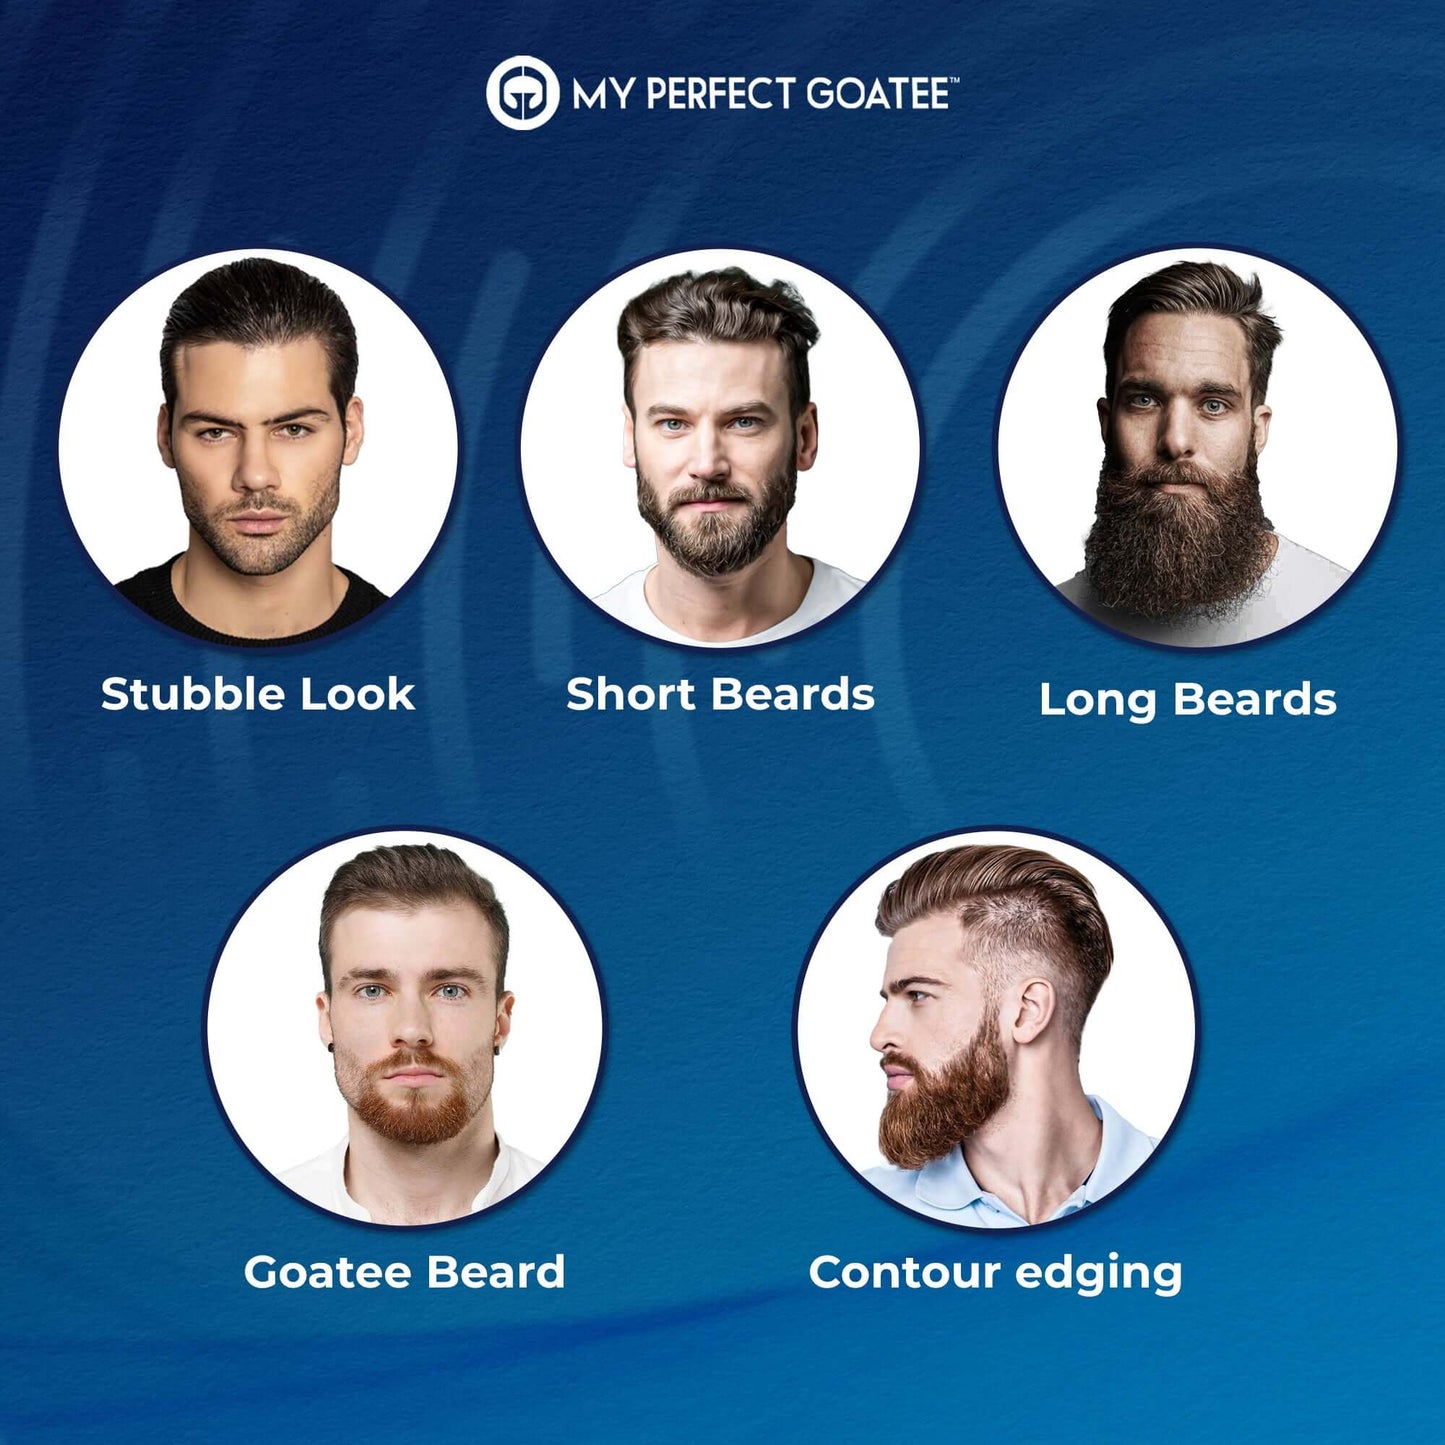 Group of men showcasing various beard looks and styles, expressing individuality and grooming choices